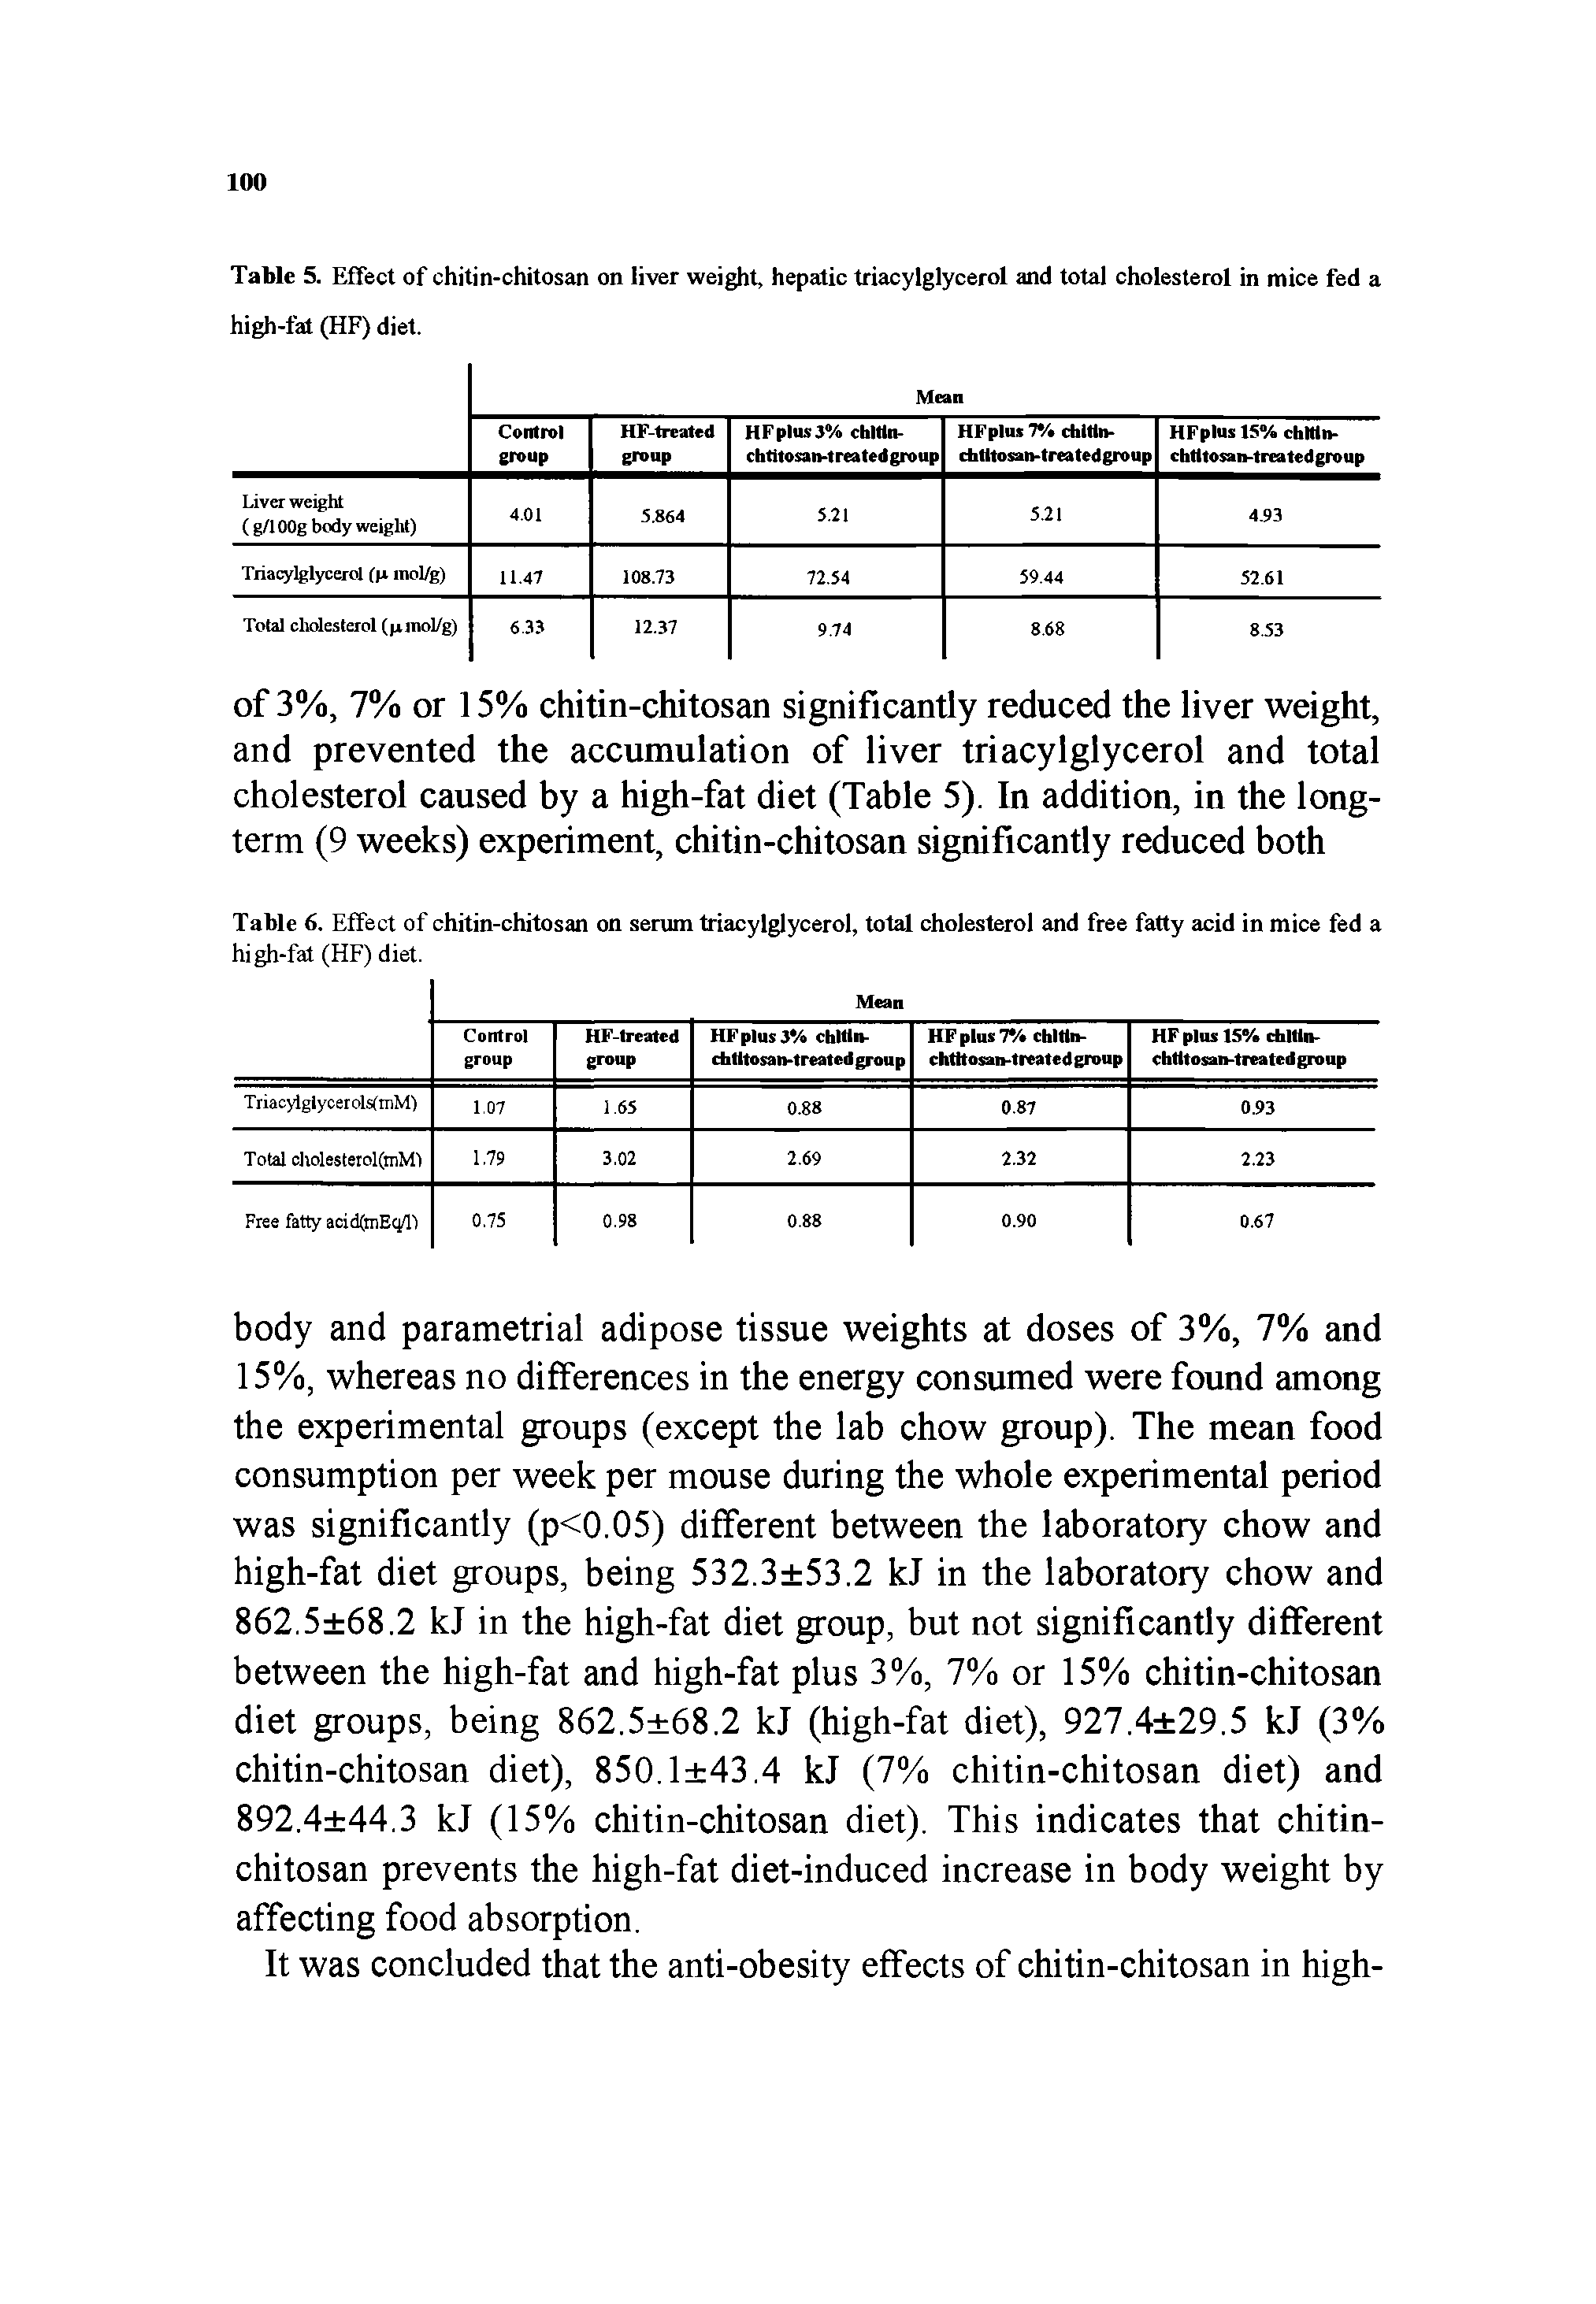 Table 5. Effect of chitin-chitosan on liver weight, hepatic triacylglycerol and total cholesterol in mice fed a high-fat (HF) diet.